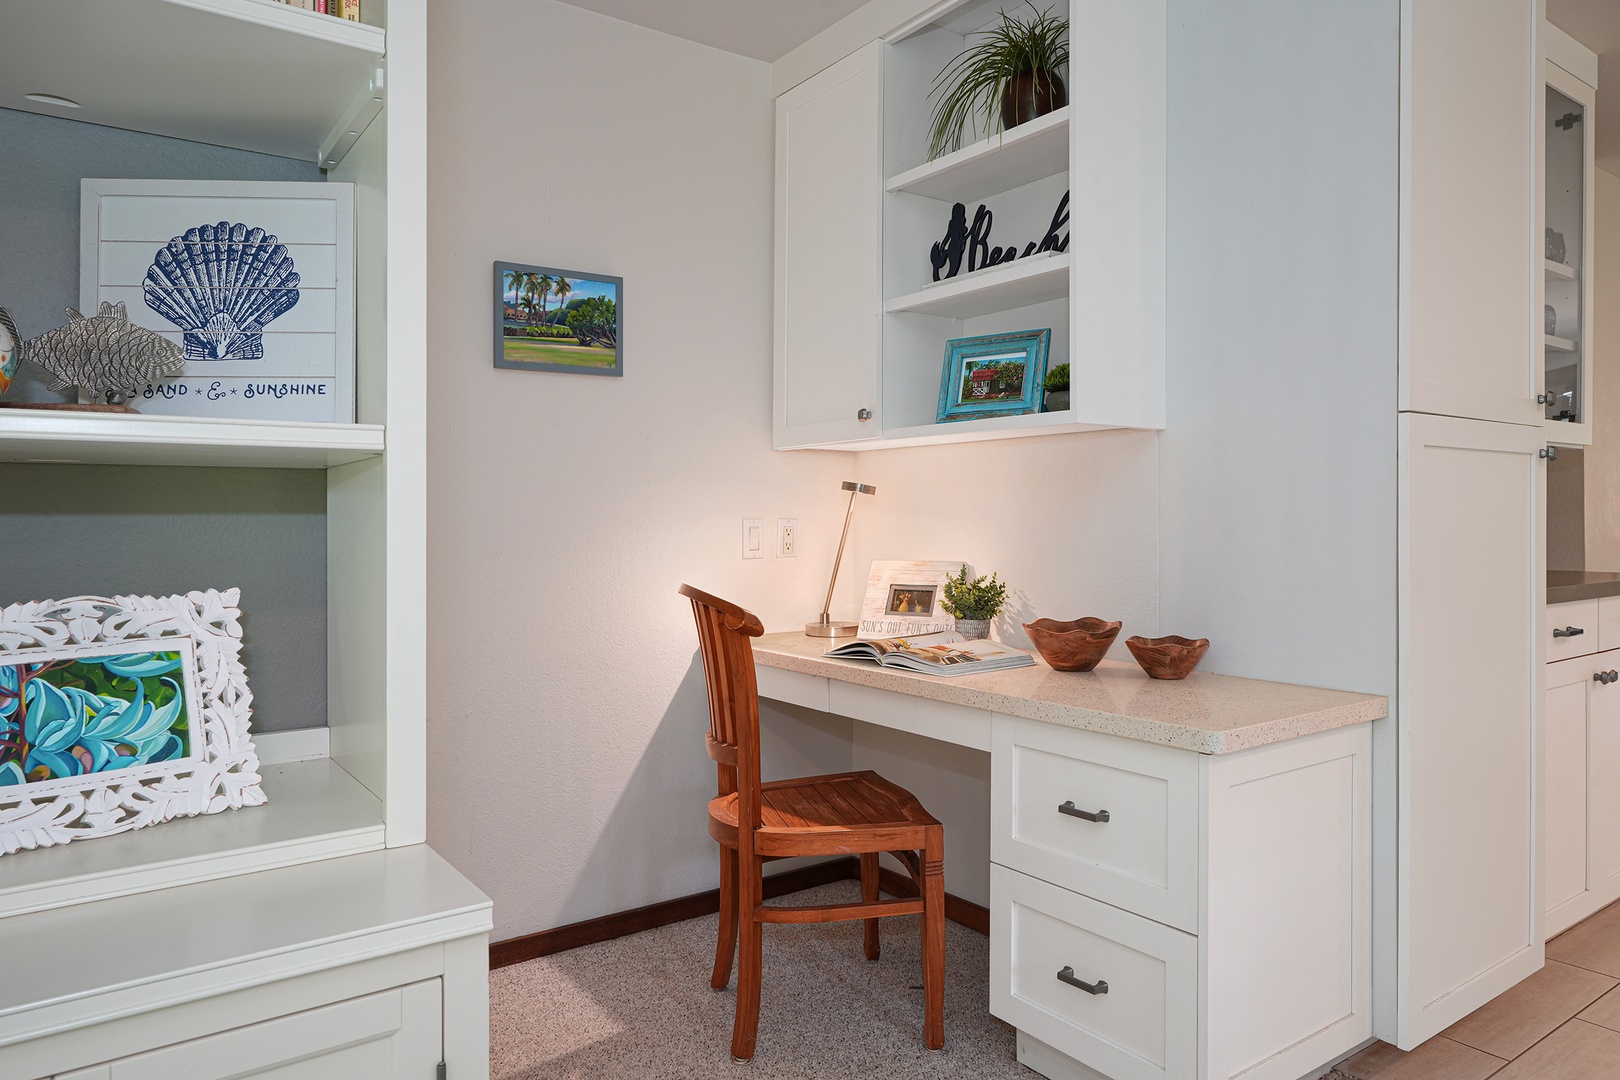 Koloa Vacation Rentals, Waikomo Streams 203 - Productivity meets comfort: a dedicated work station designed to inspire focus and creativity.